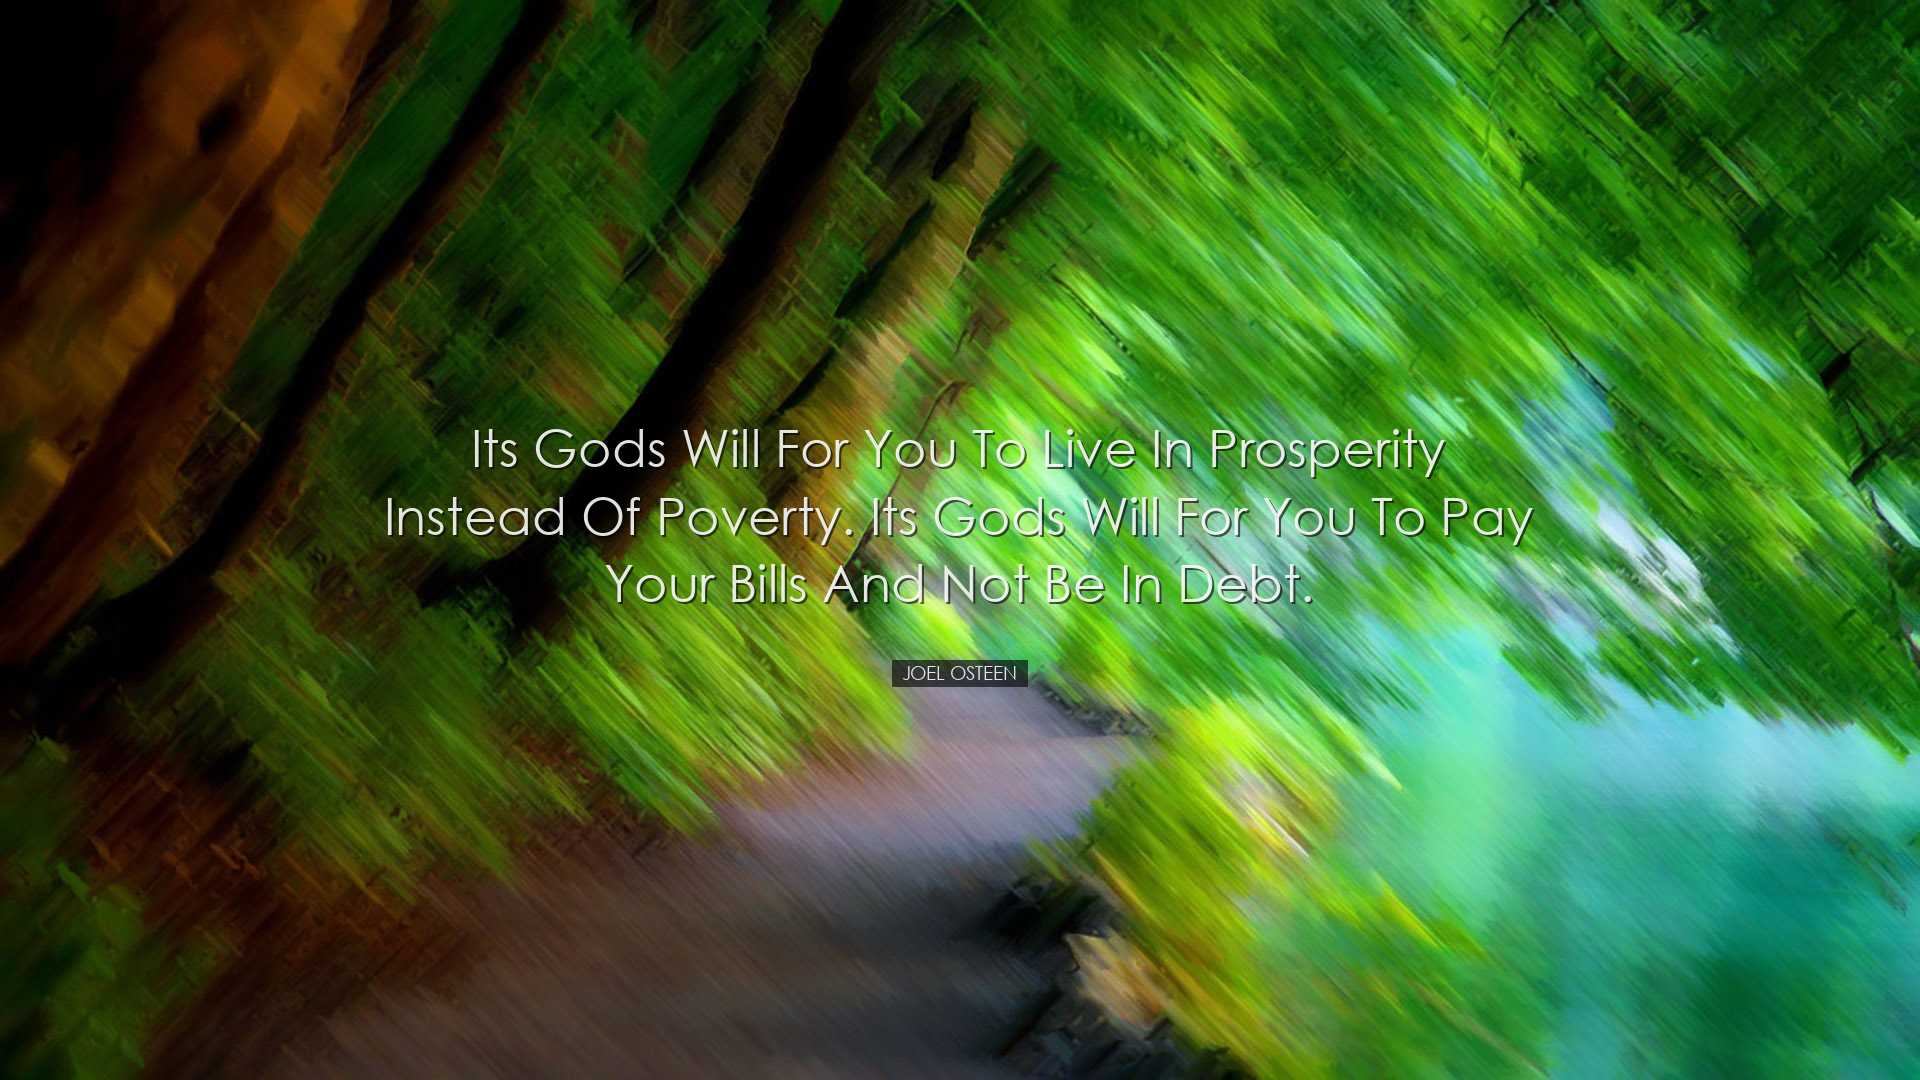 Its Gods will for you to live in prosperity instead of poverty. It